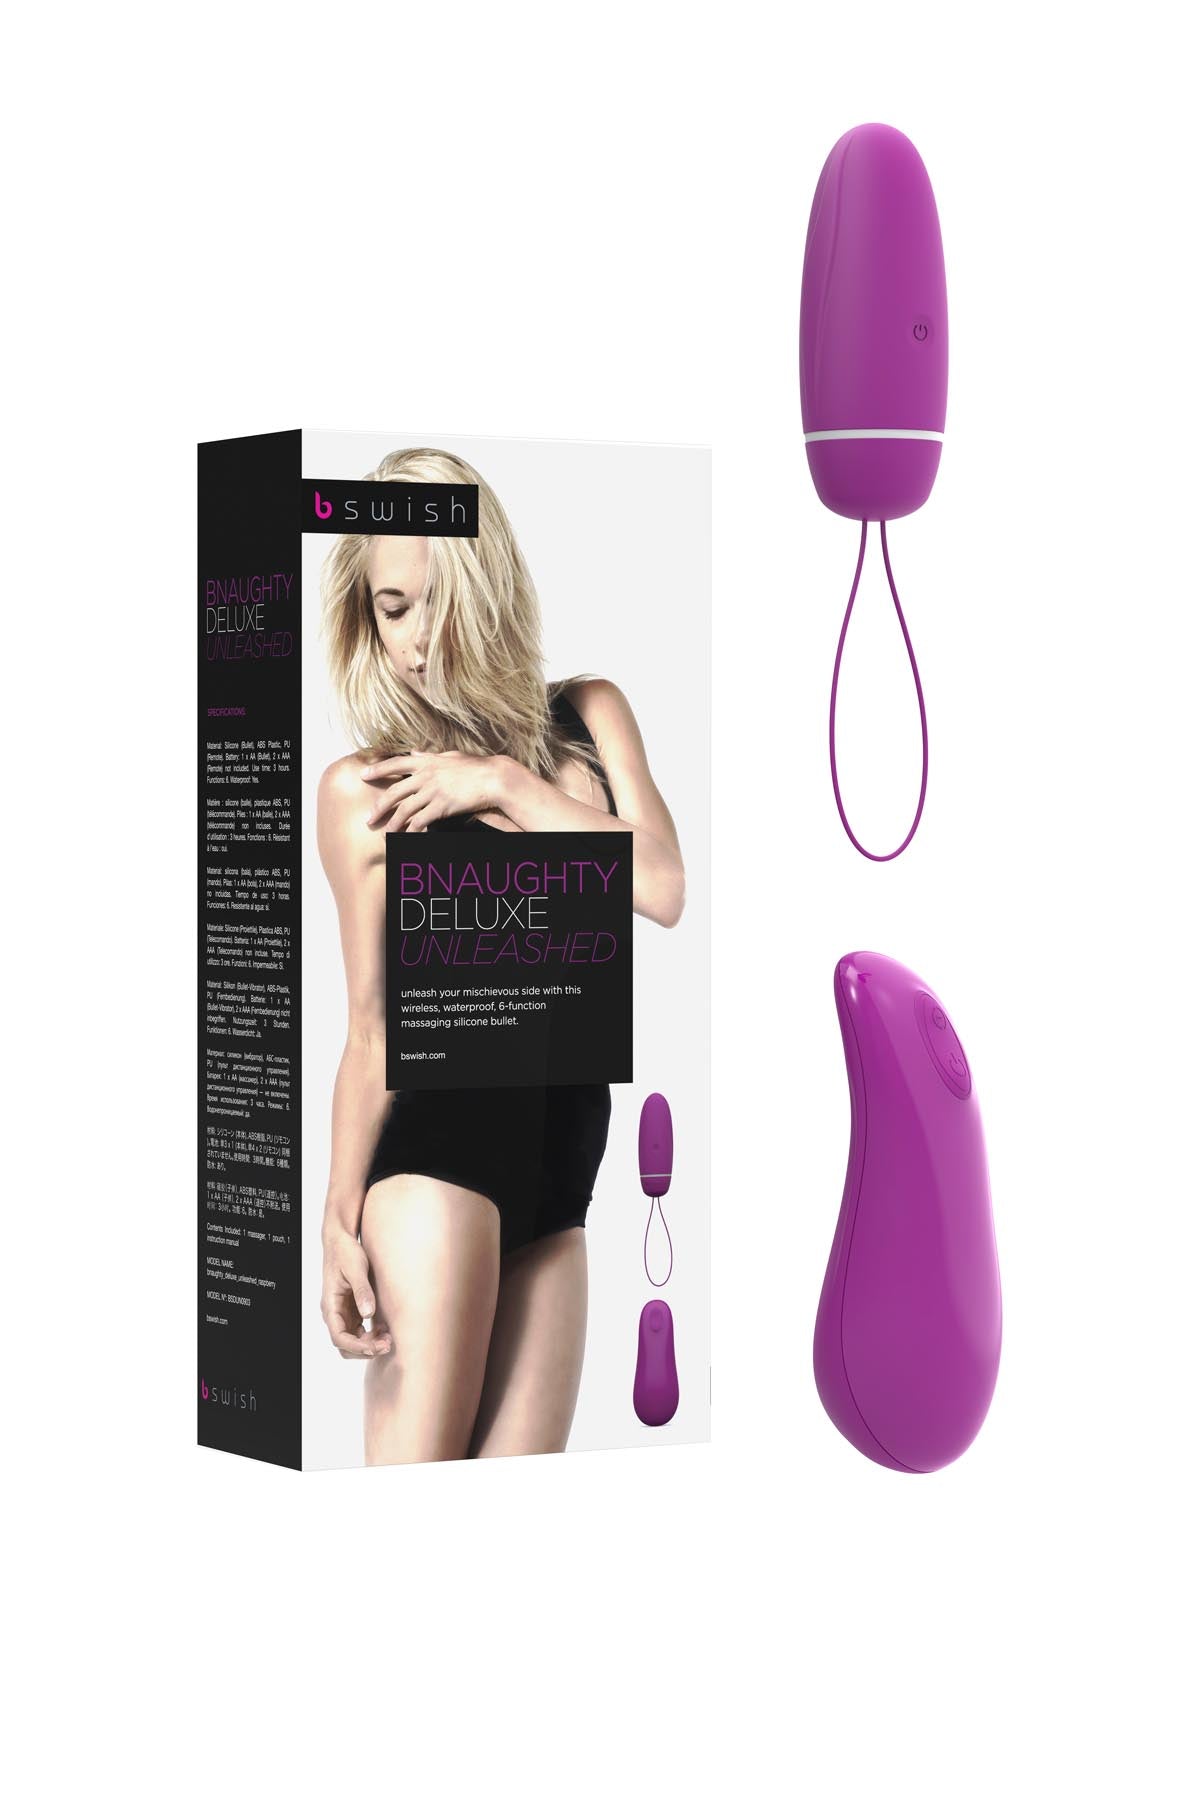 Bnaughty Deluxe Unleashed Raspberry - Just for you desires